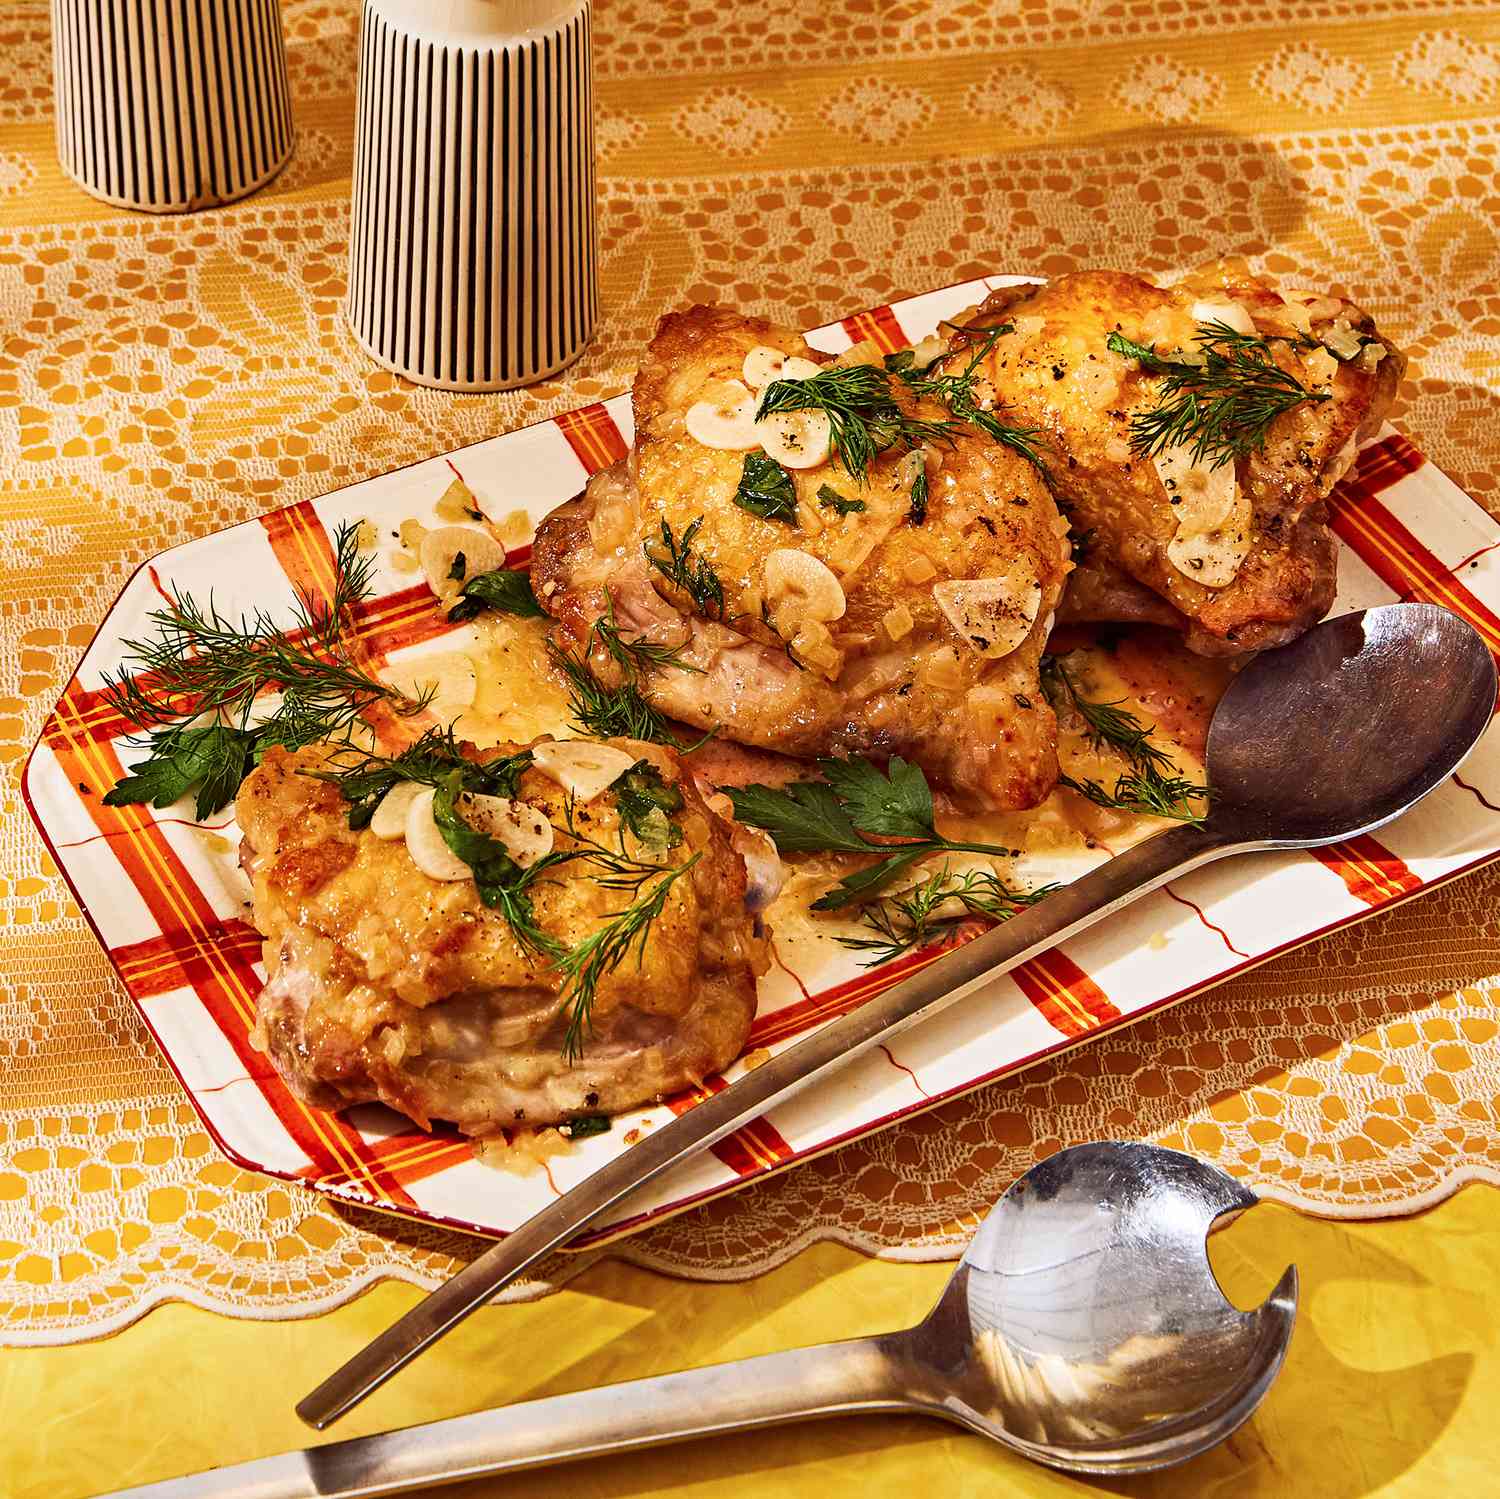 Any-Brine Chicken with Herb Pan Sauce